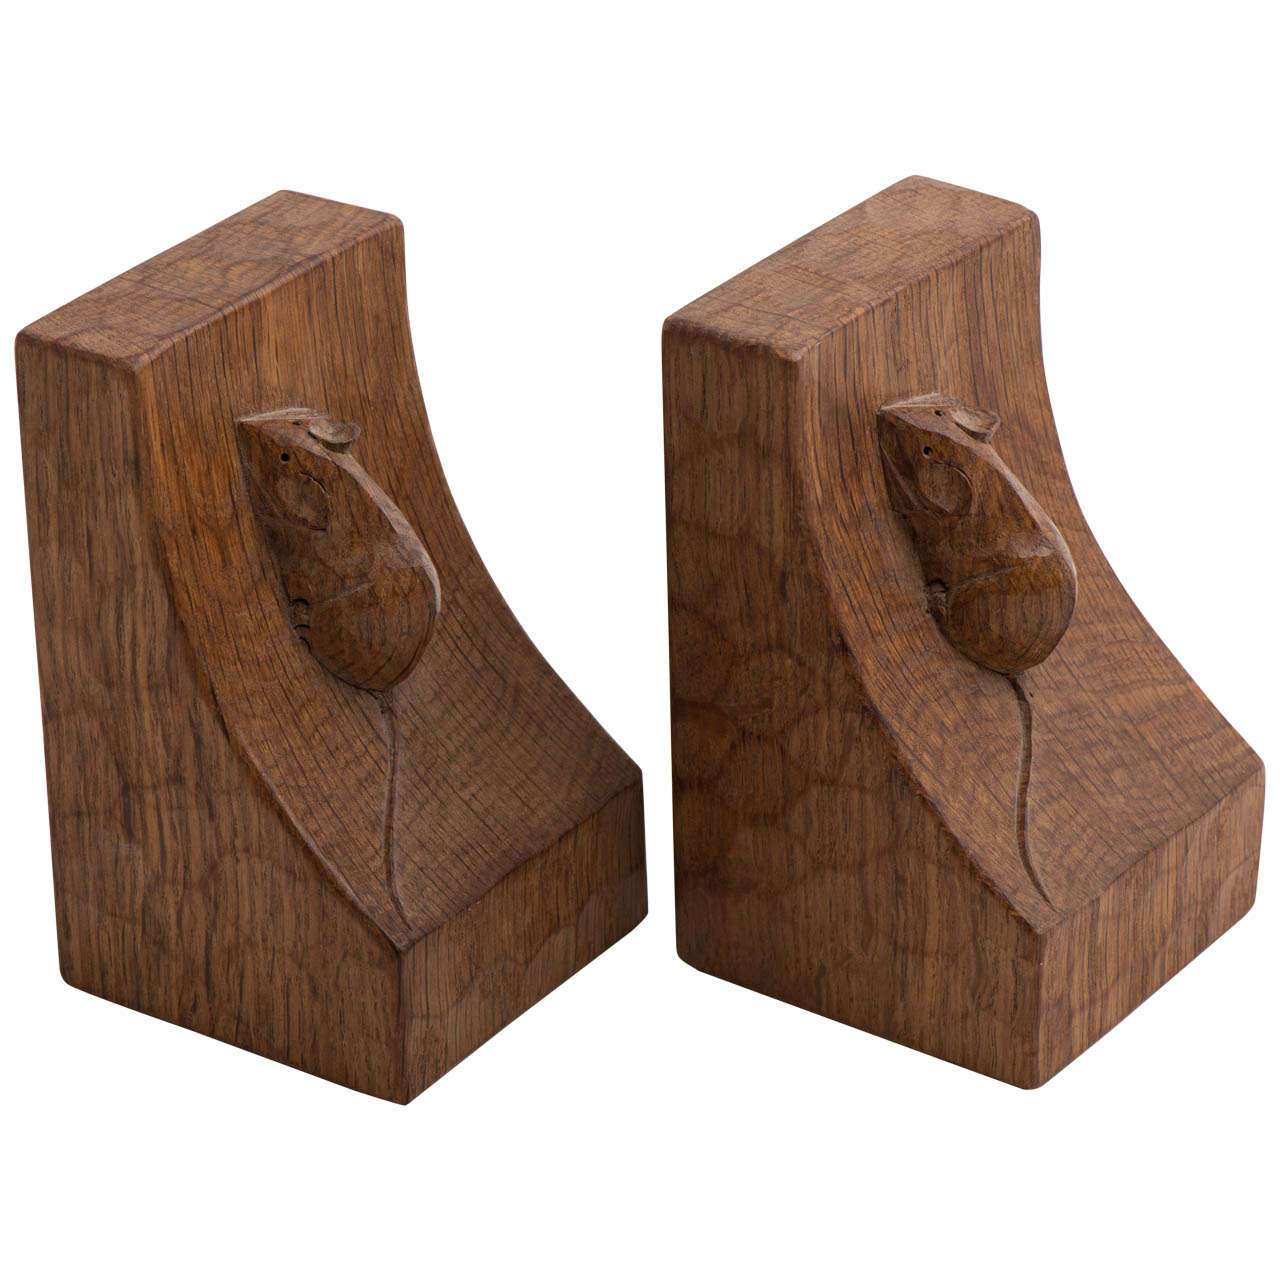 A Pair of Robert  "Mouseman" Thompson Bookends